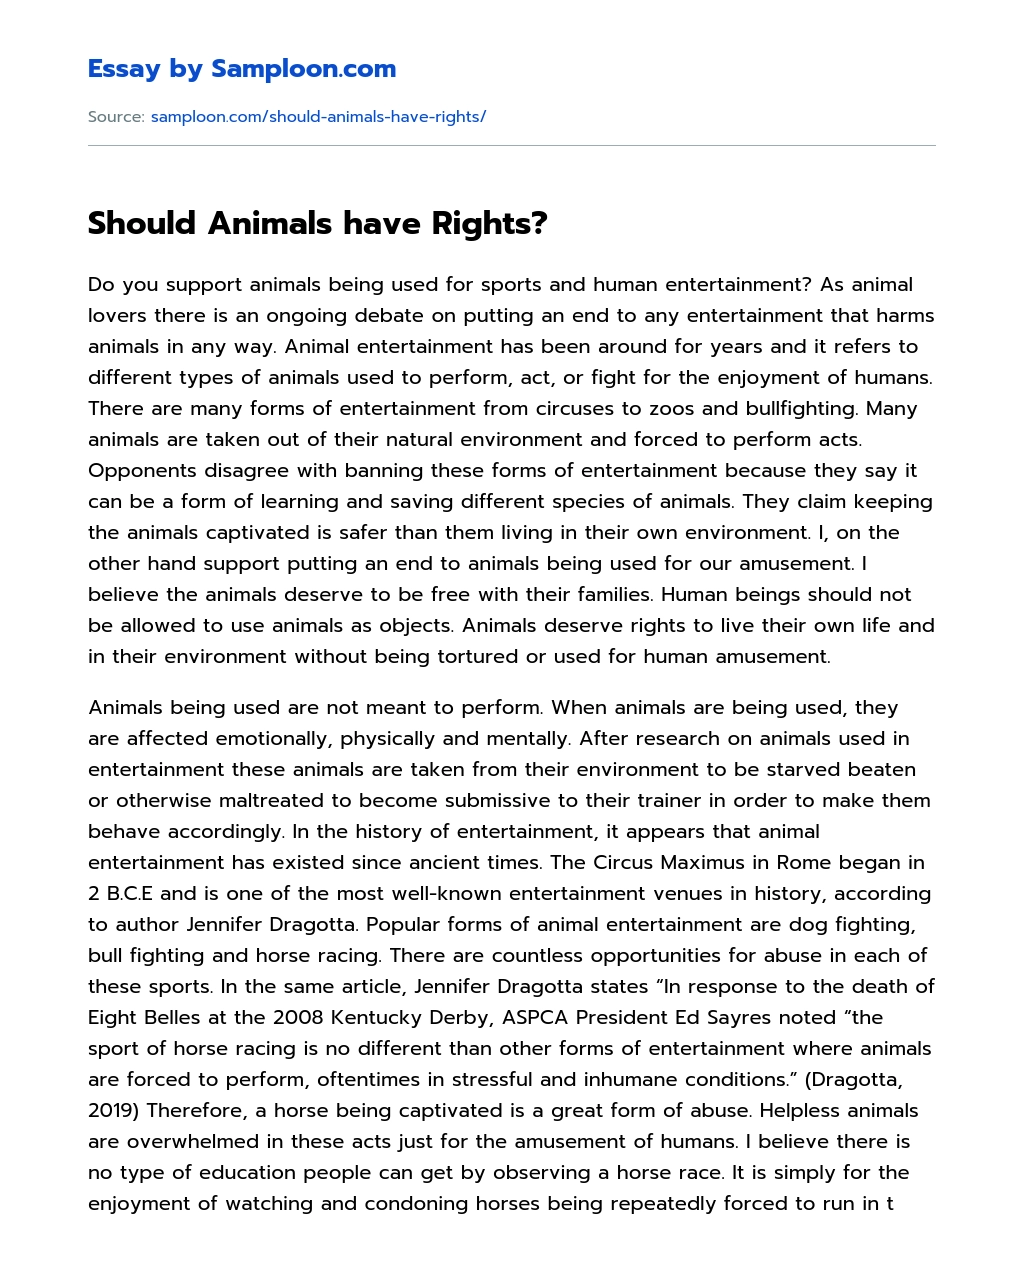 Should Animals have Rights? essay